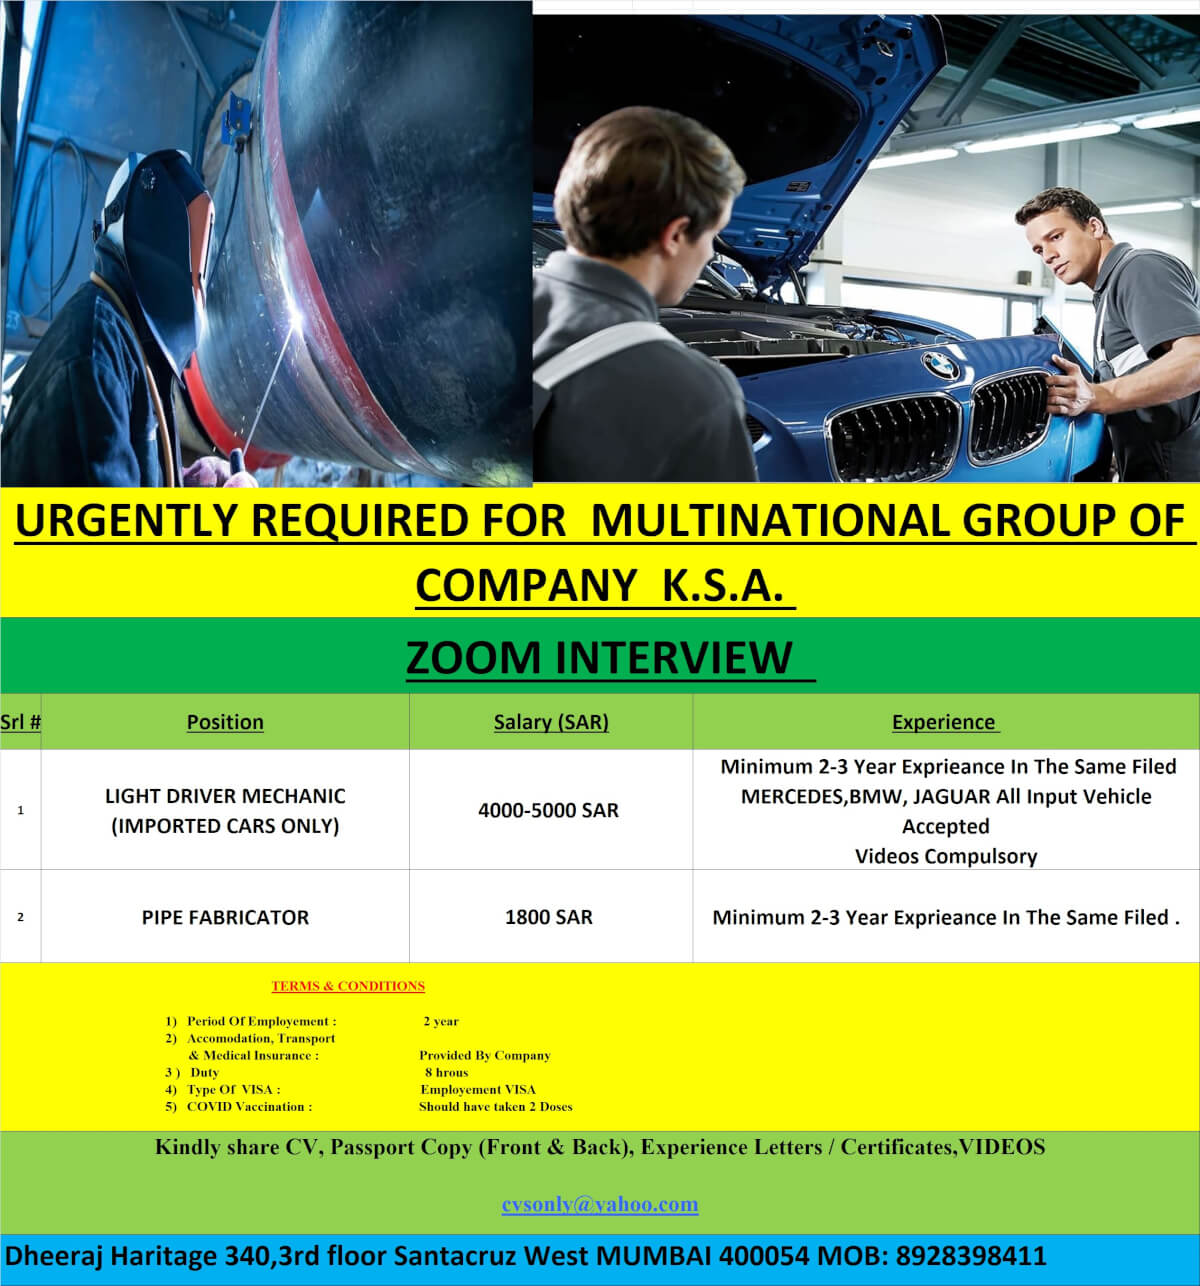 URGENTLY REQUIRED FOR MULTINATIONAL GROUP OF COMPANY K.S.A.